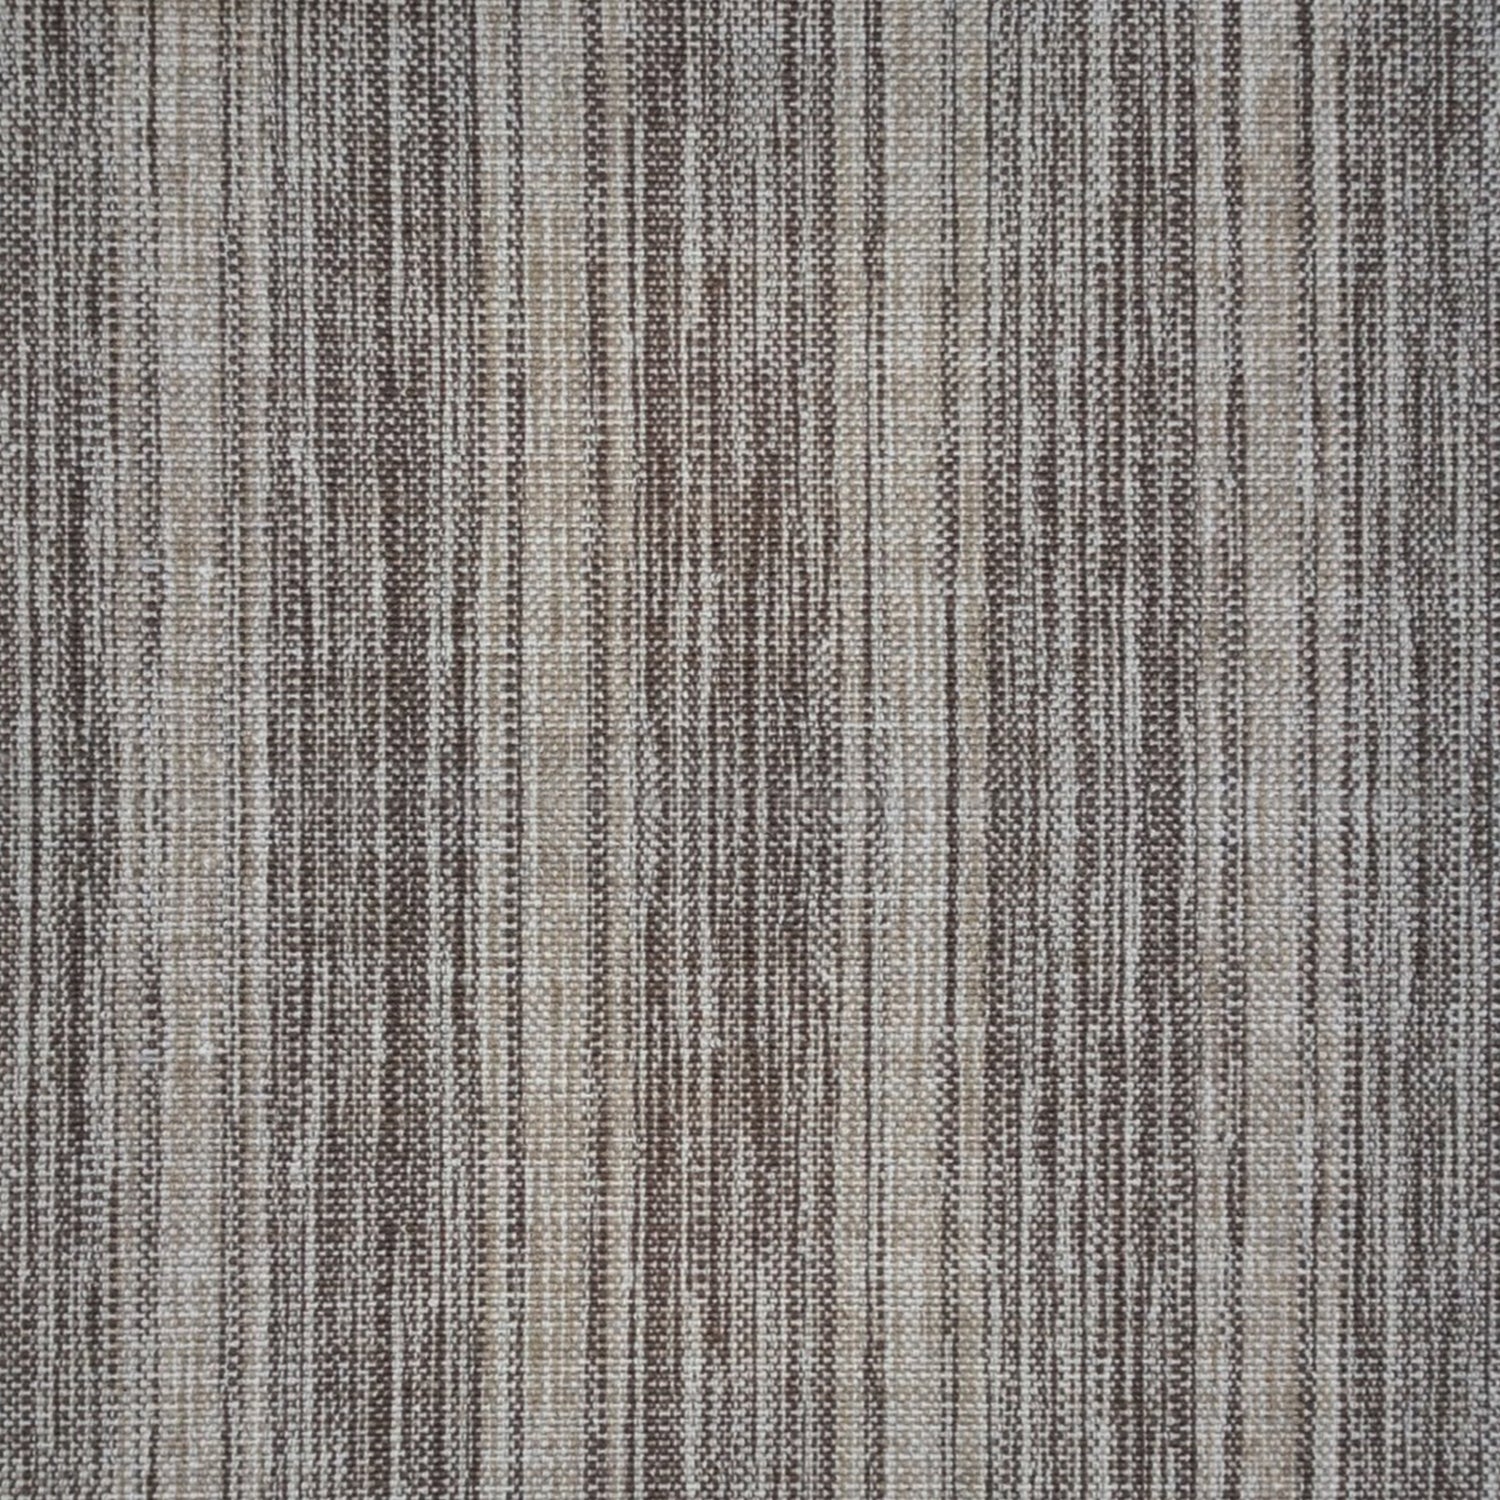 Linen broadloom carpet swatch in a woven ombré stripe pattern in tan and brown shades.